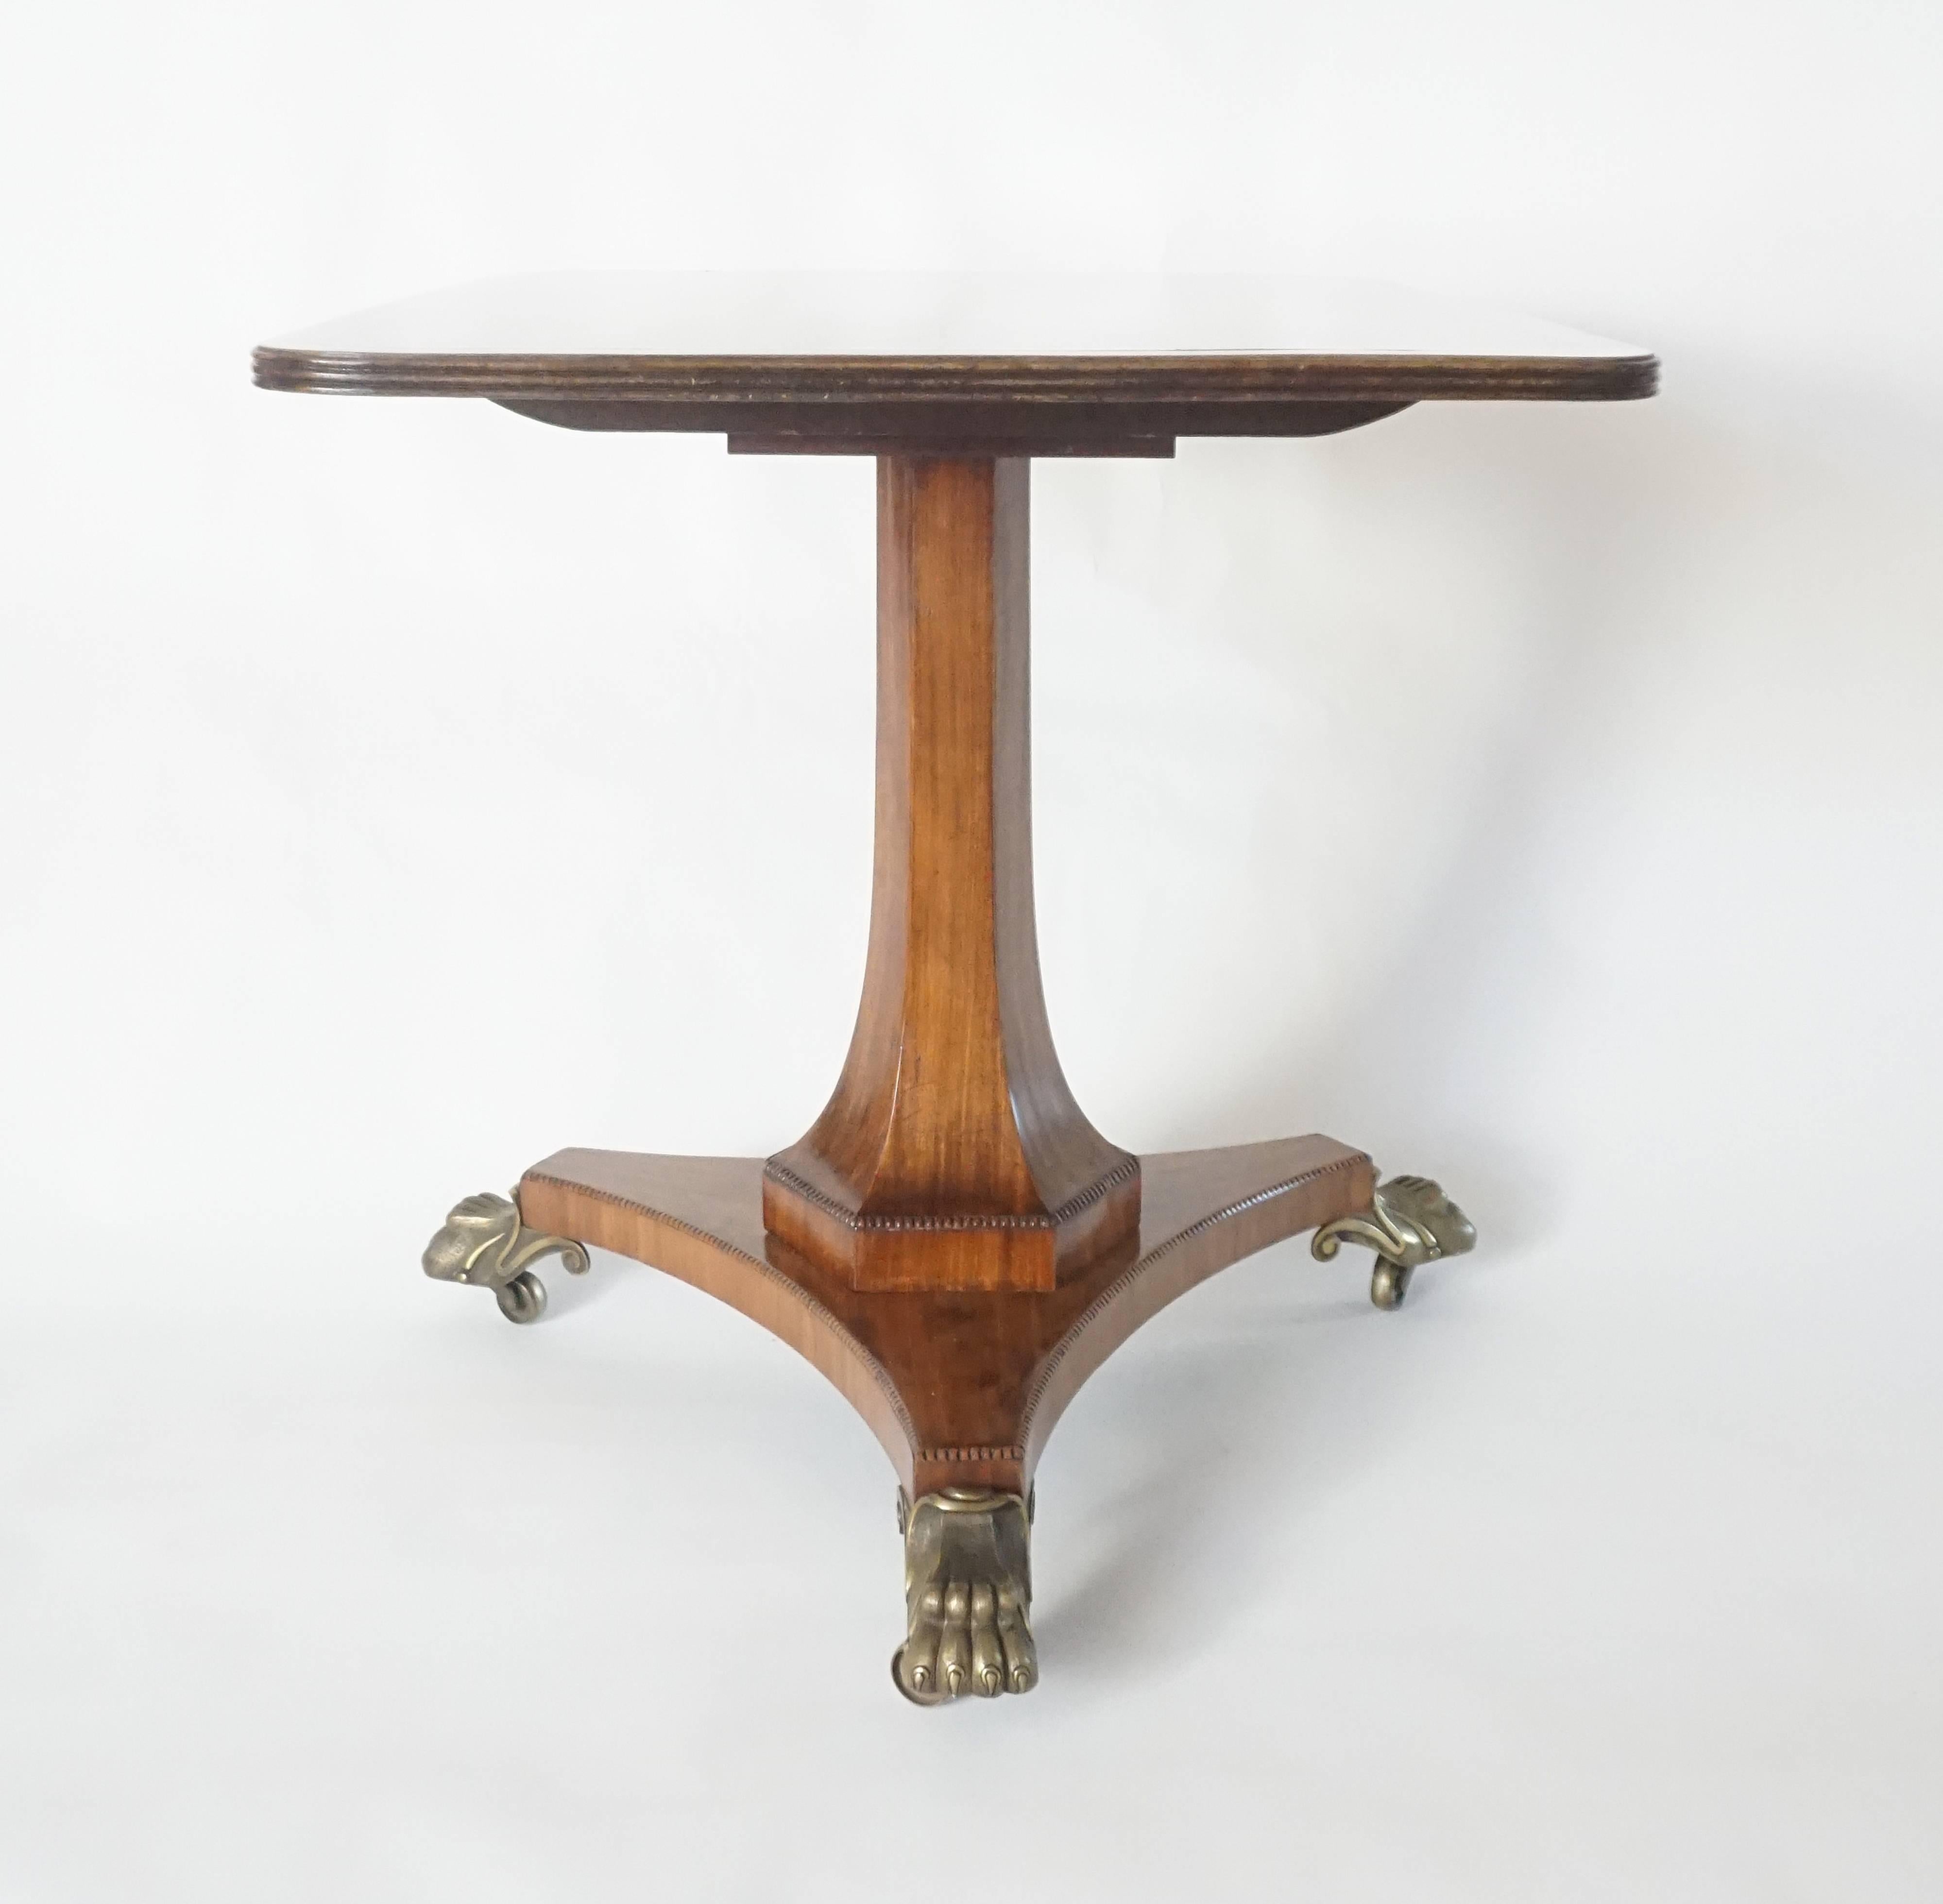 An exceptional, circa 1820 English Regency period mahogany tilt-top table of unusual form having solid single-timber rectangular top with line-inlaid brass border and reeded edge upon reverse-tapering hexagonal-form pedestal support with beaded